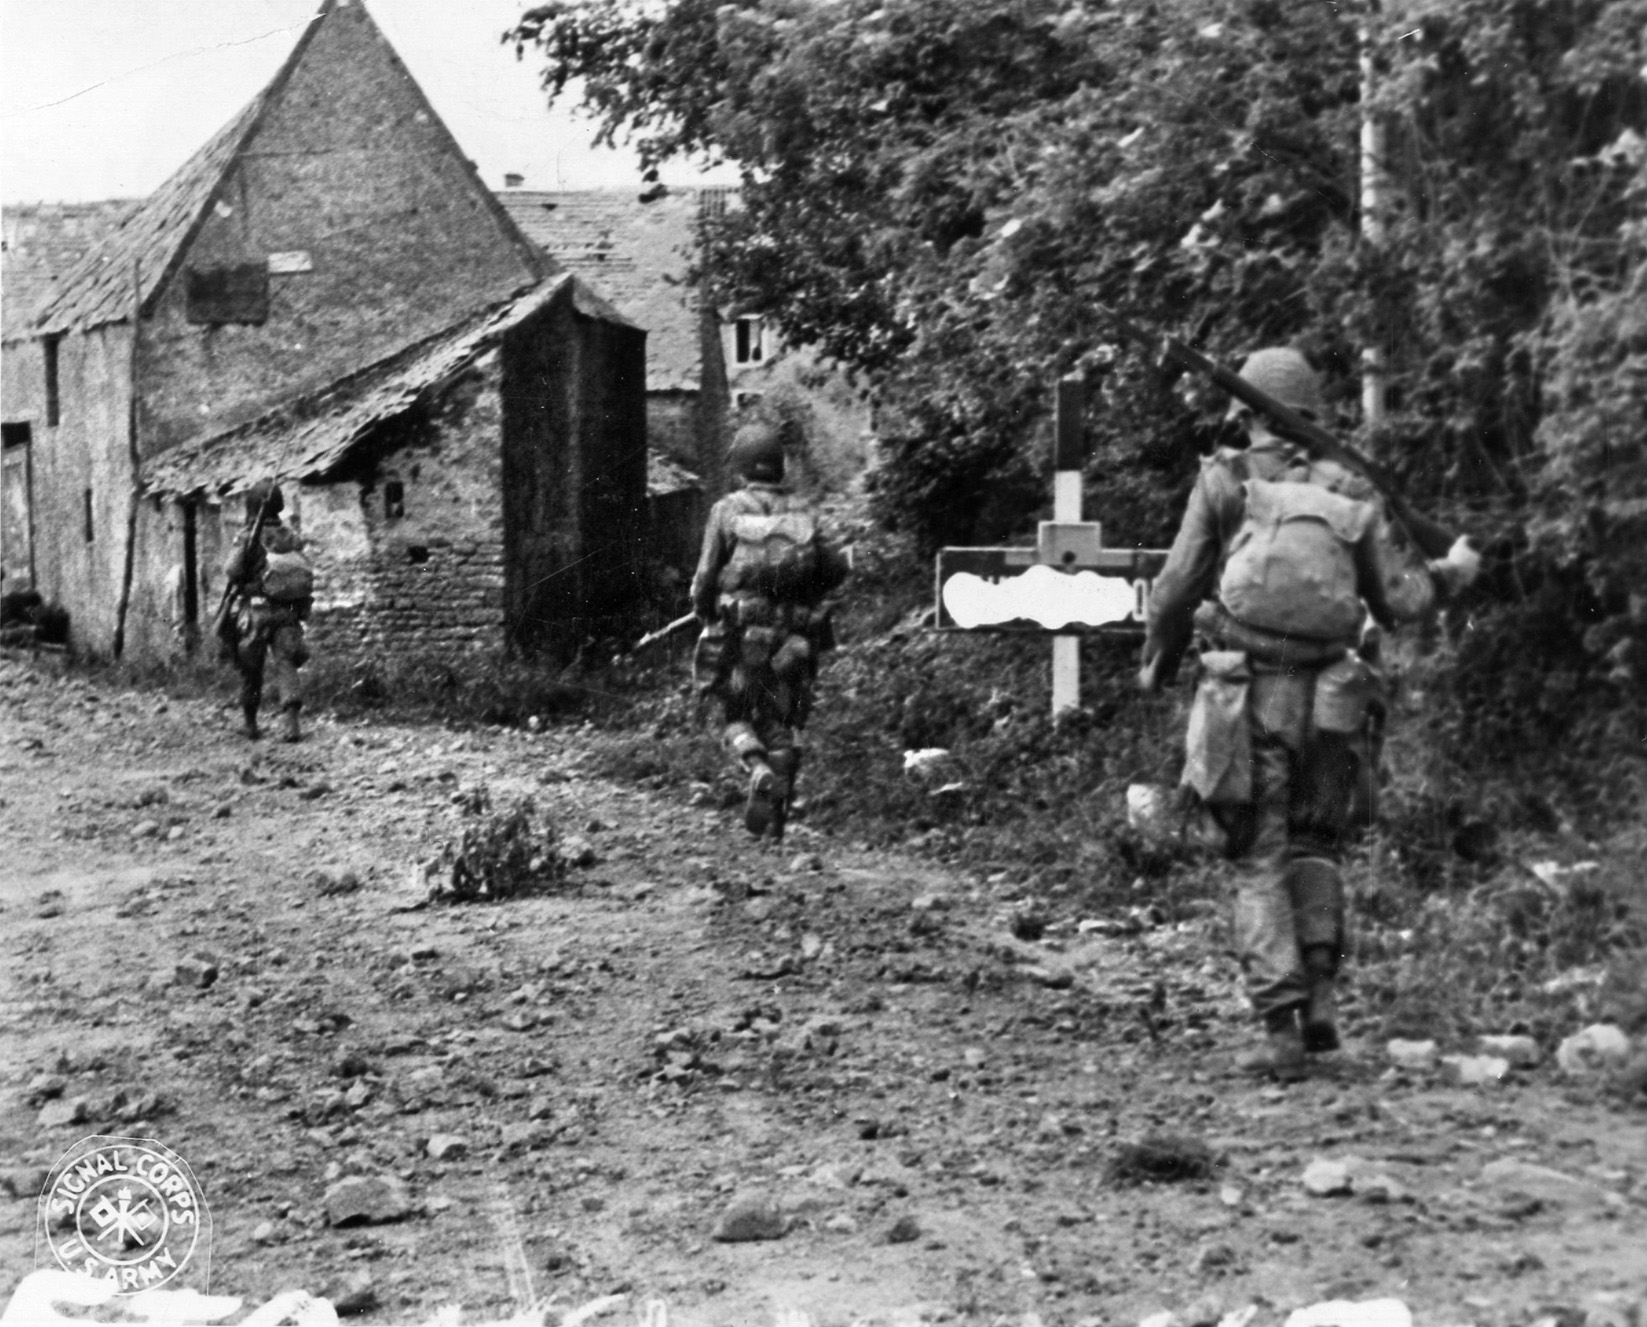 A short time after parachuting into Normandy during the predawn hours of June 6, 1944, American paratroopers advance warily down a dirt road and into a small village. Contact with the Germans was, in some cases, immediate upon landing. 